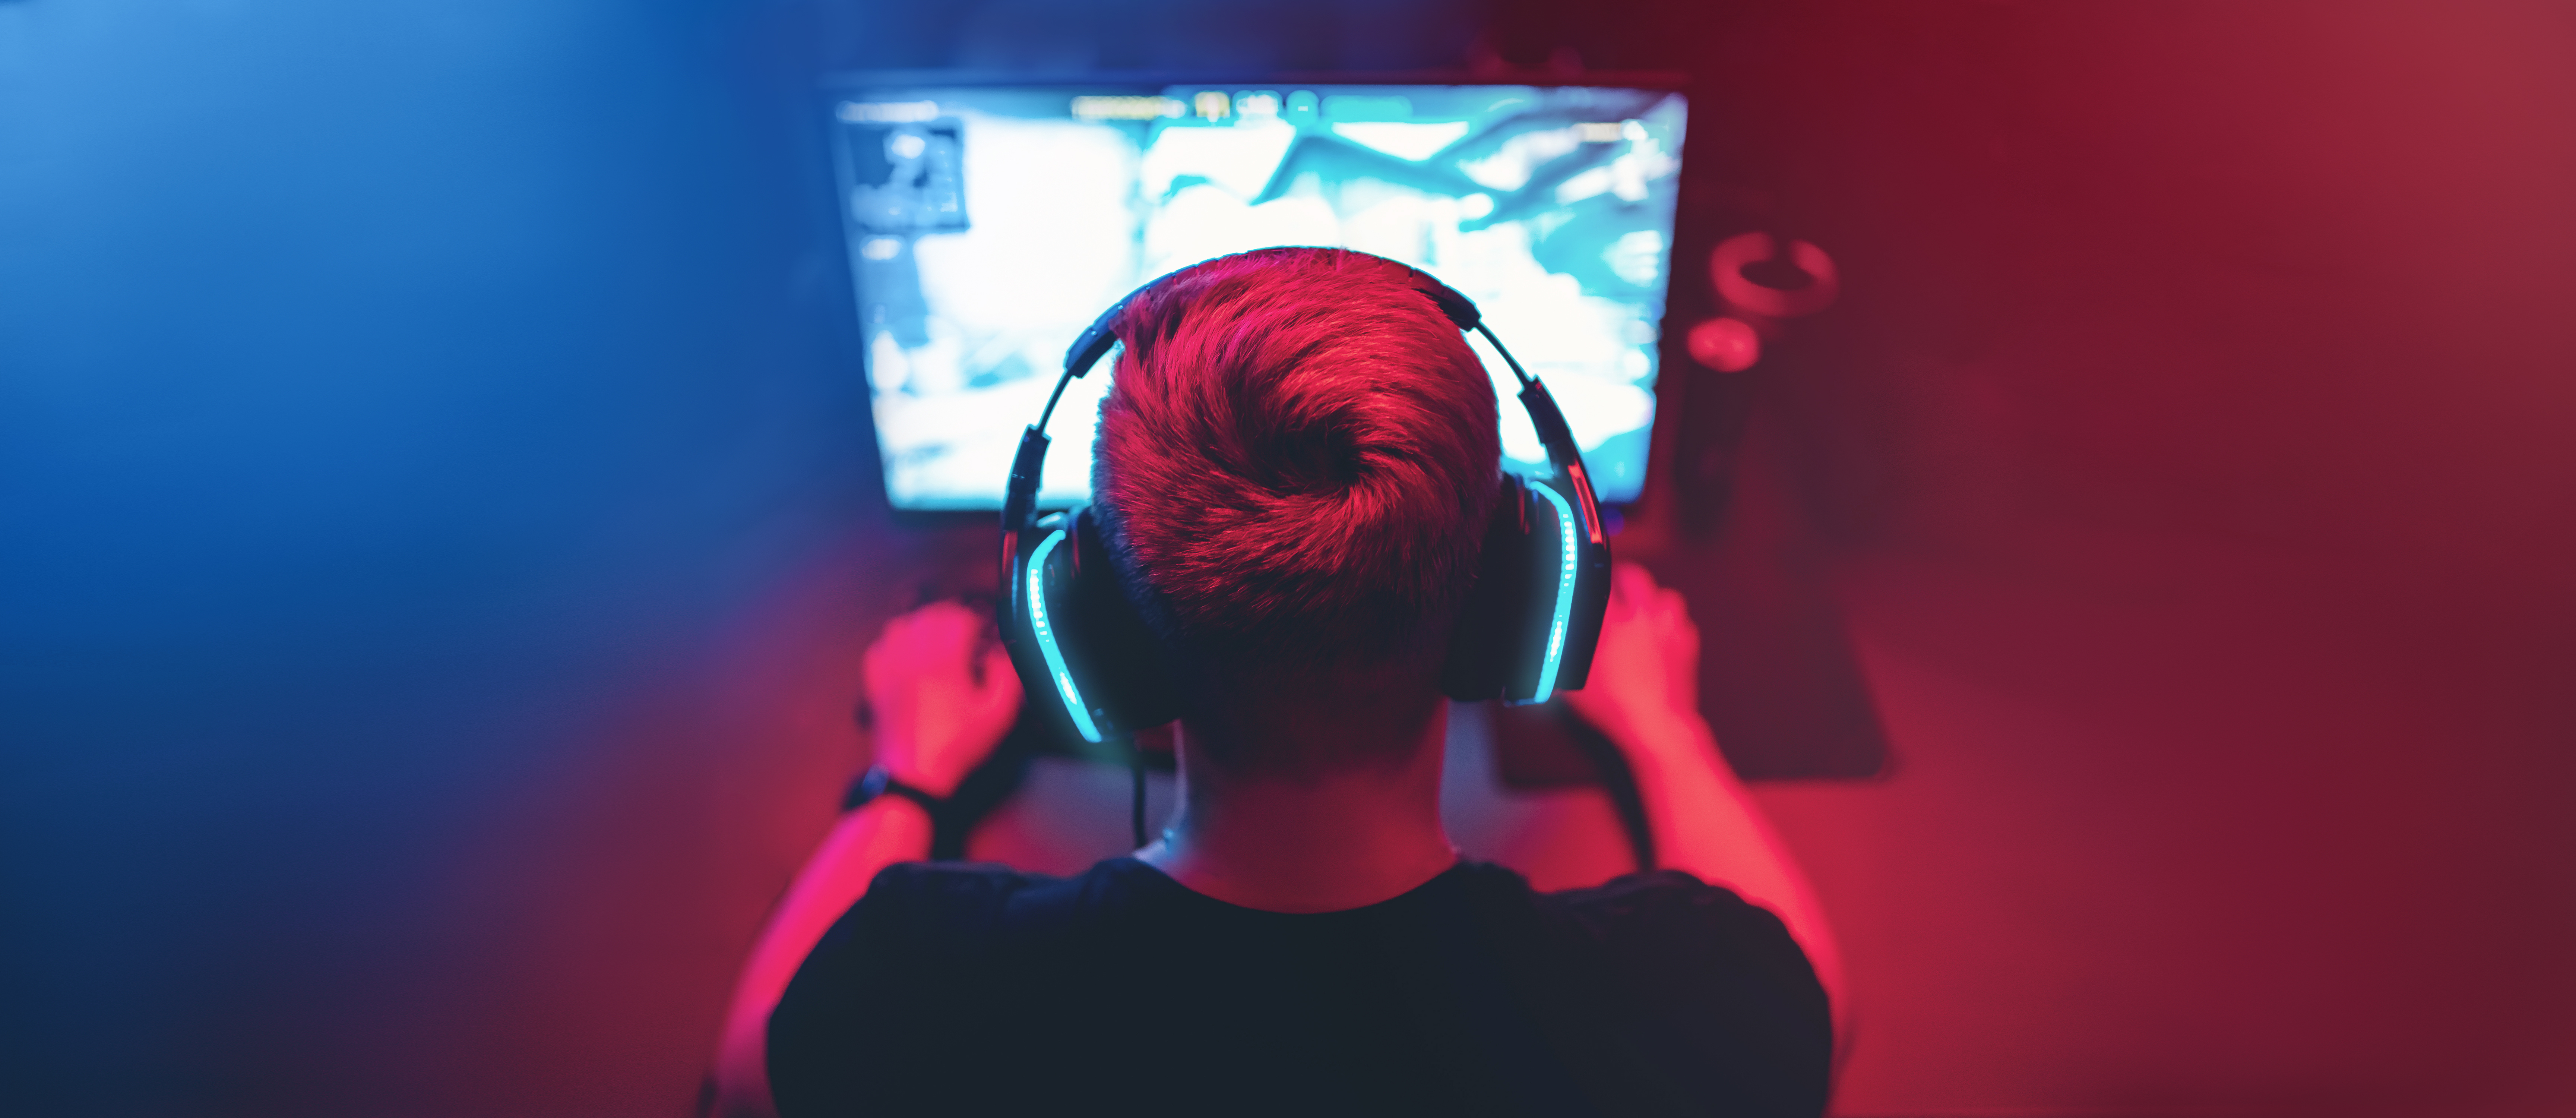 Blockchain Gaming 'May be Key to Mass Adoption', Outpacing DeFi, NFTs - Report